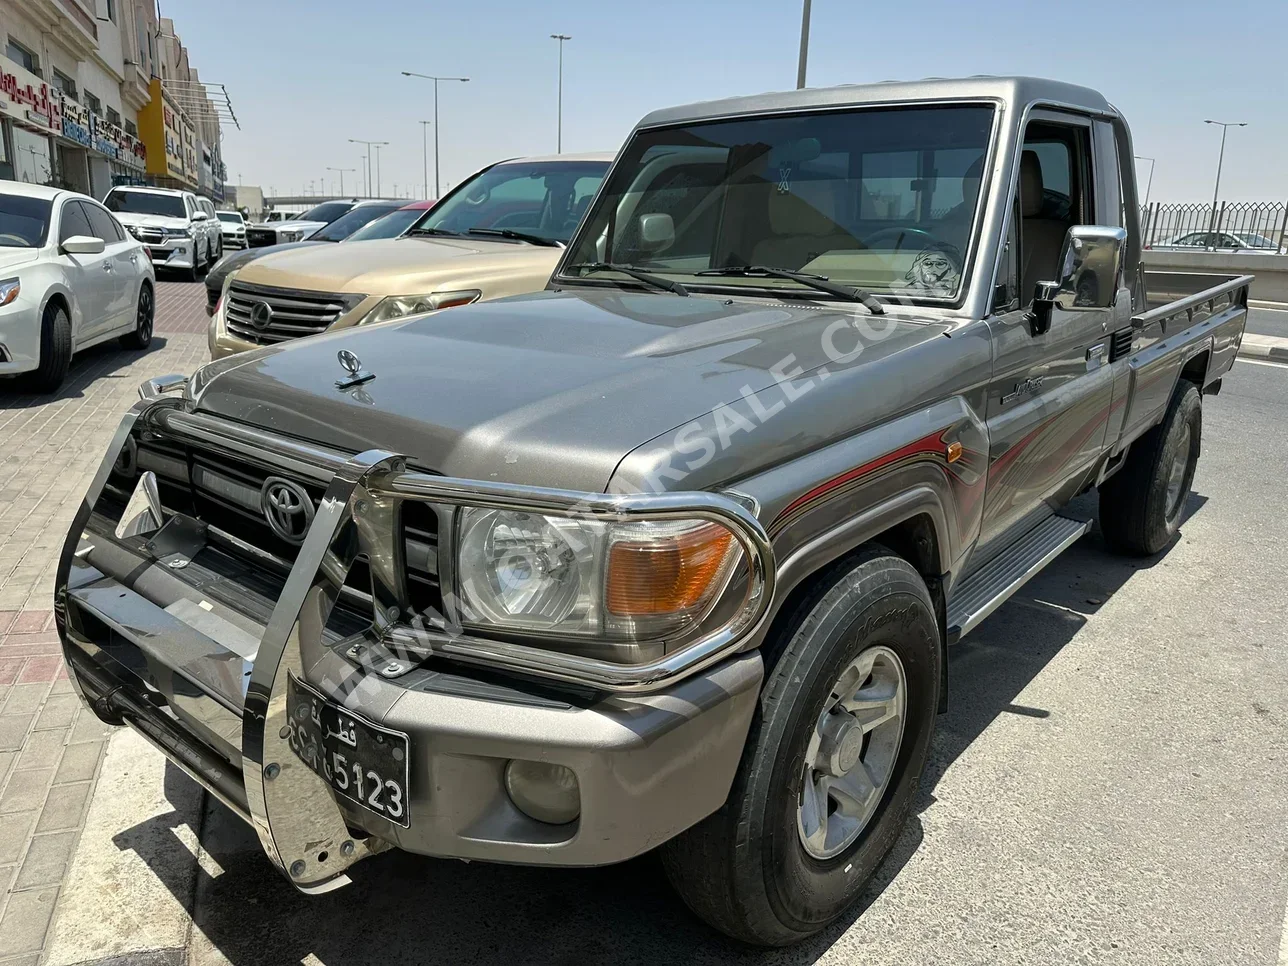 Toyota  Land Cruiser  LX  2009  Manual  341,000 Km  6 Cylinder  Four Wheel Drive (4WD)  Pick Up  Brown